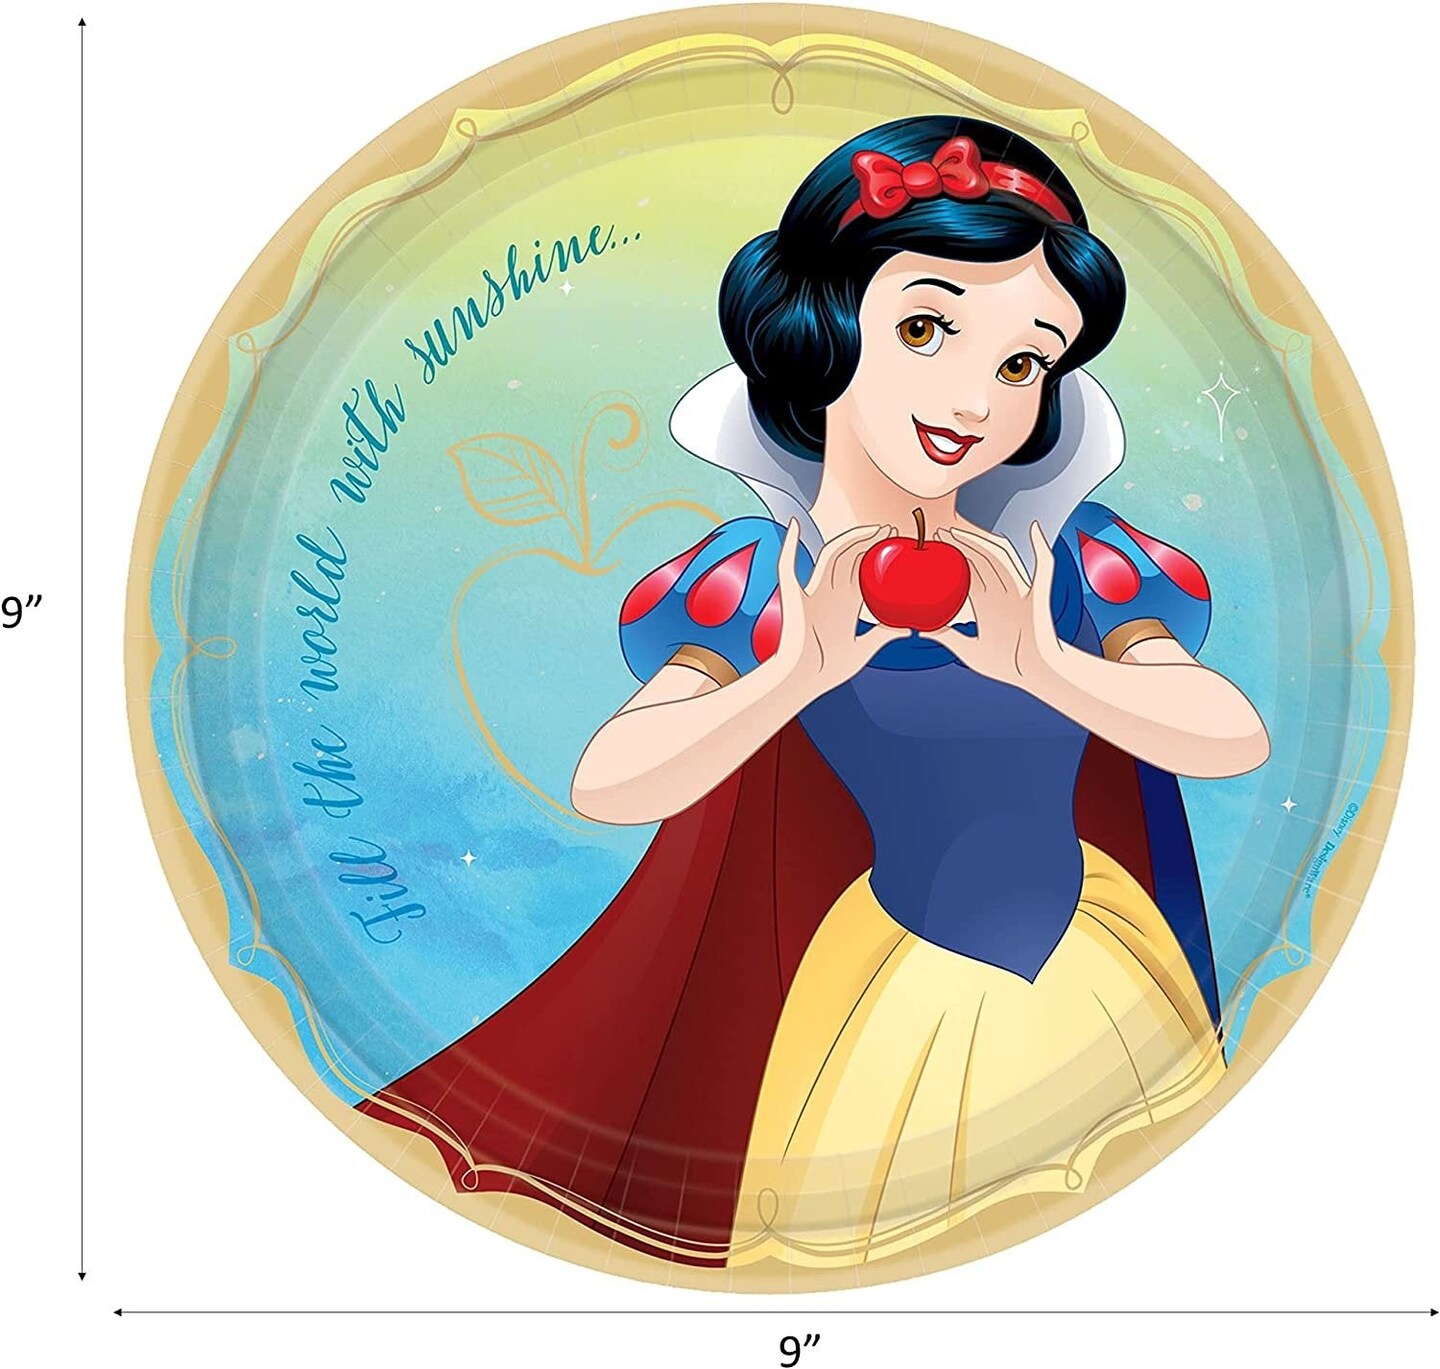 Princess Snow White Birthday Party Supplies Pack with Snow White Plates and Snow White Napkins for 16 Guests